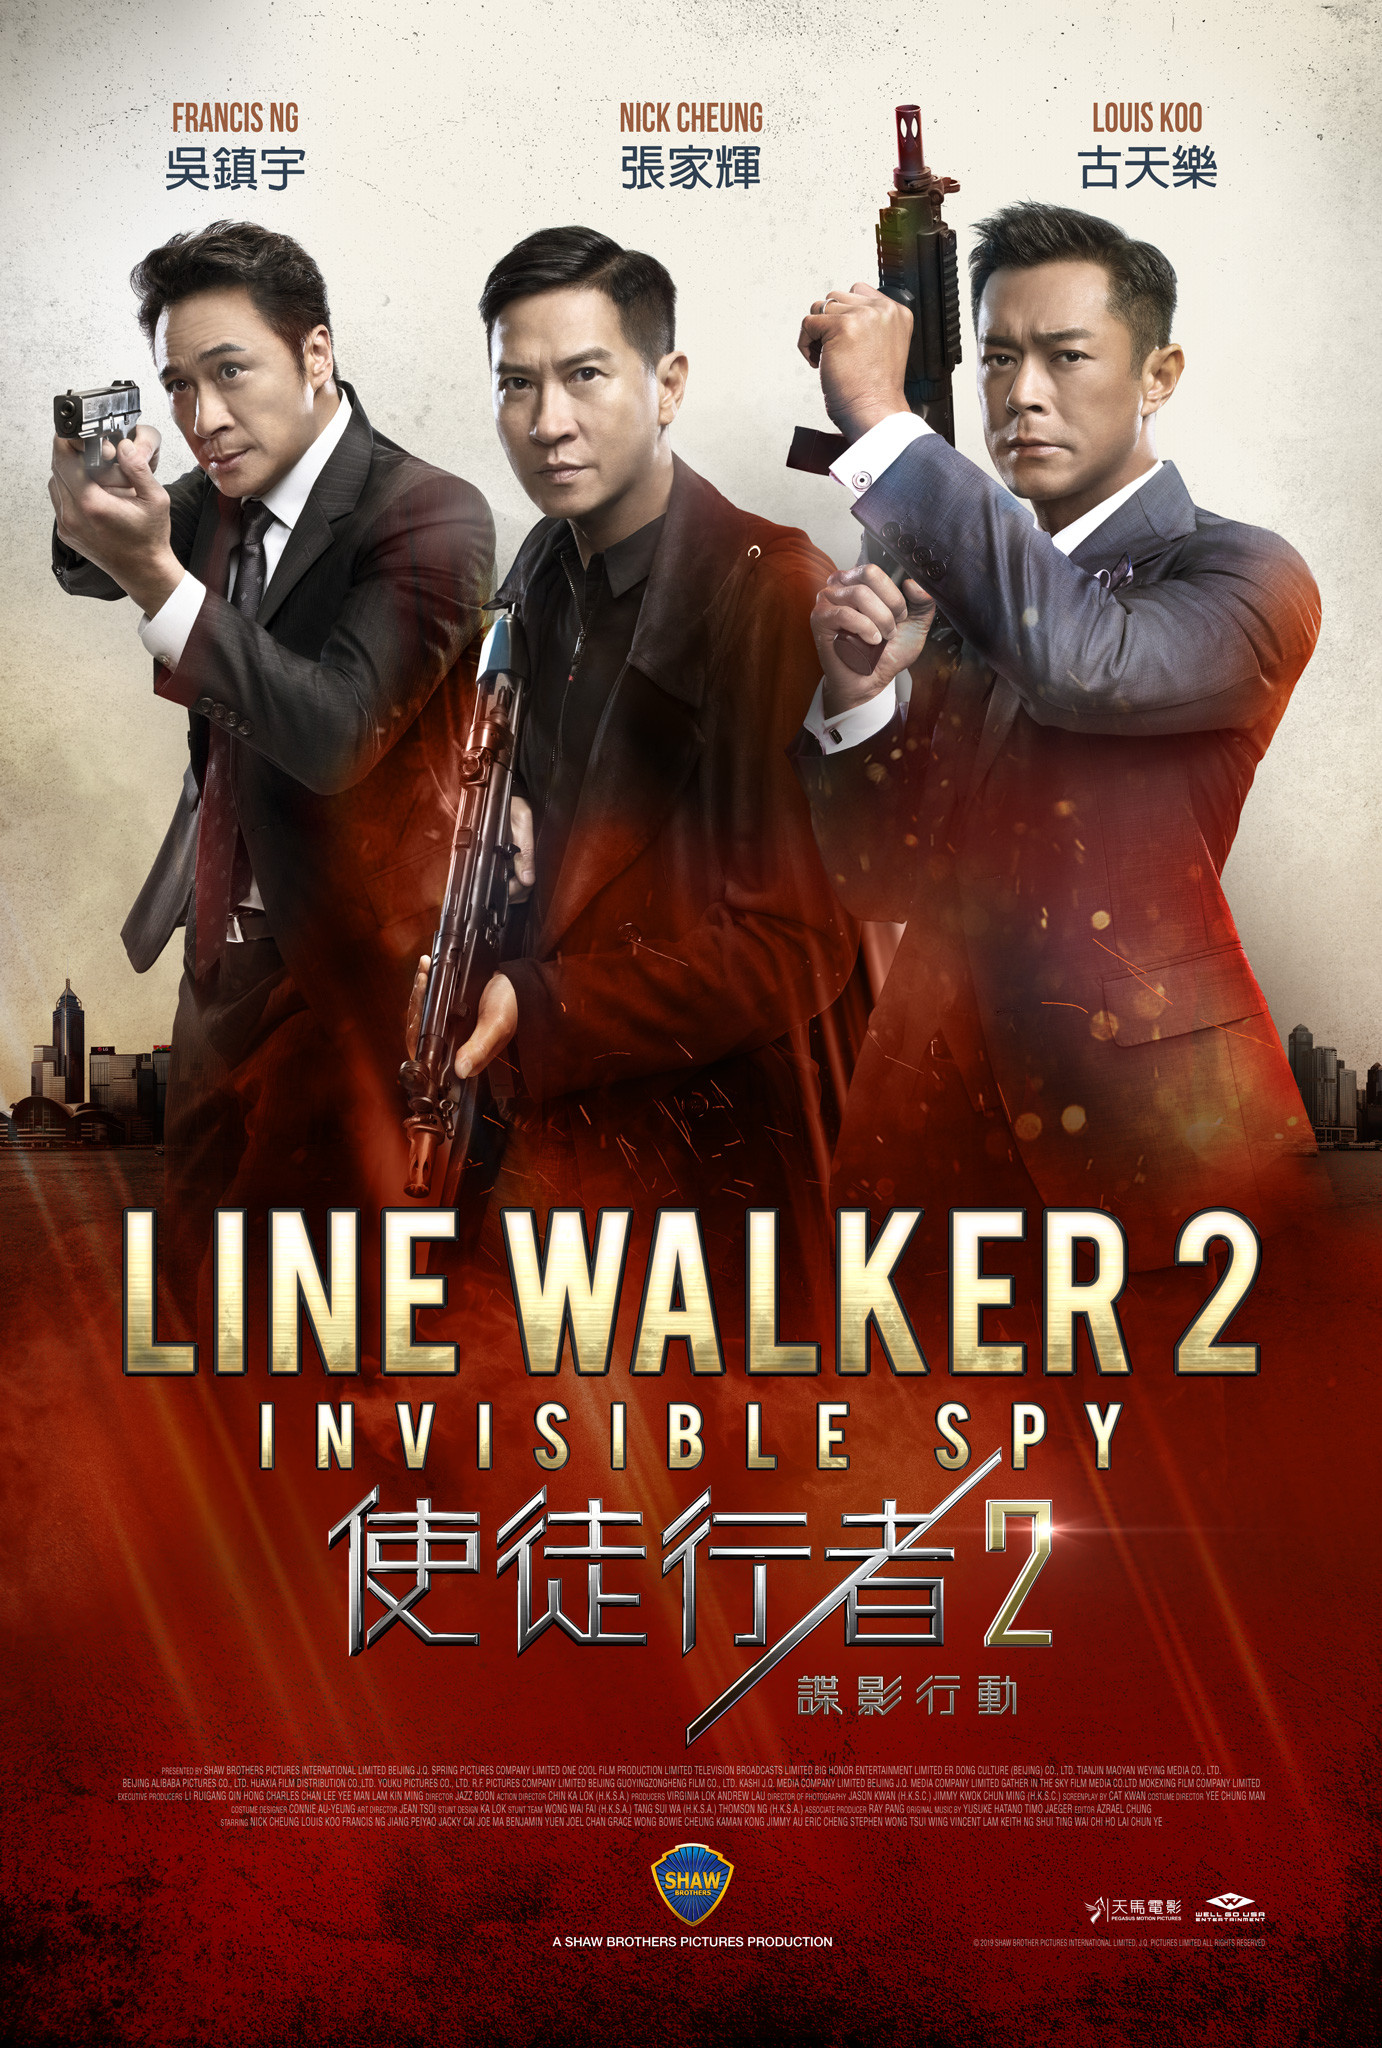 Line Walker 2: Invisible Spy at an AMC Theatre near you.